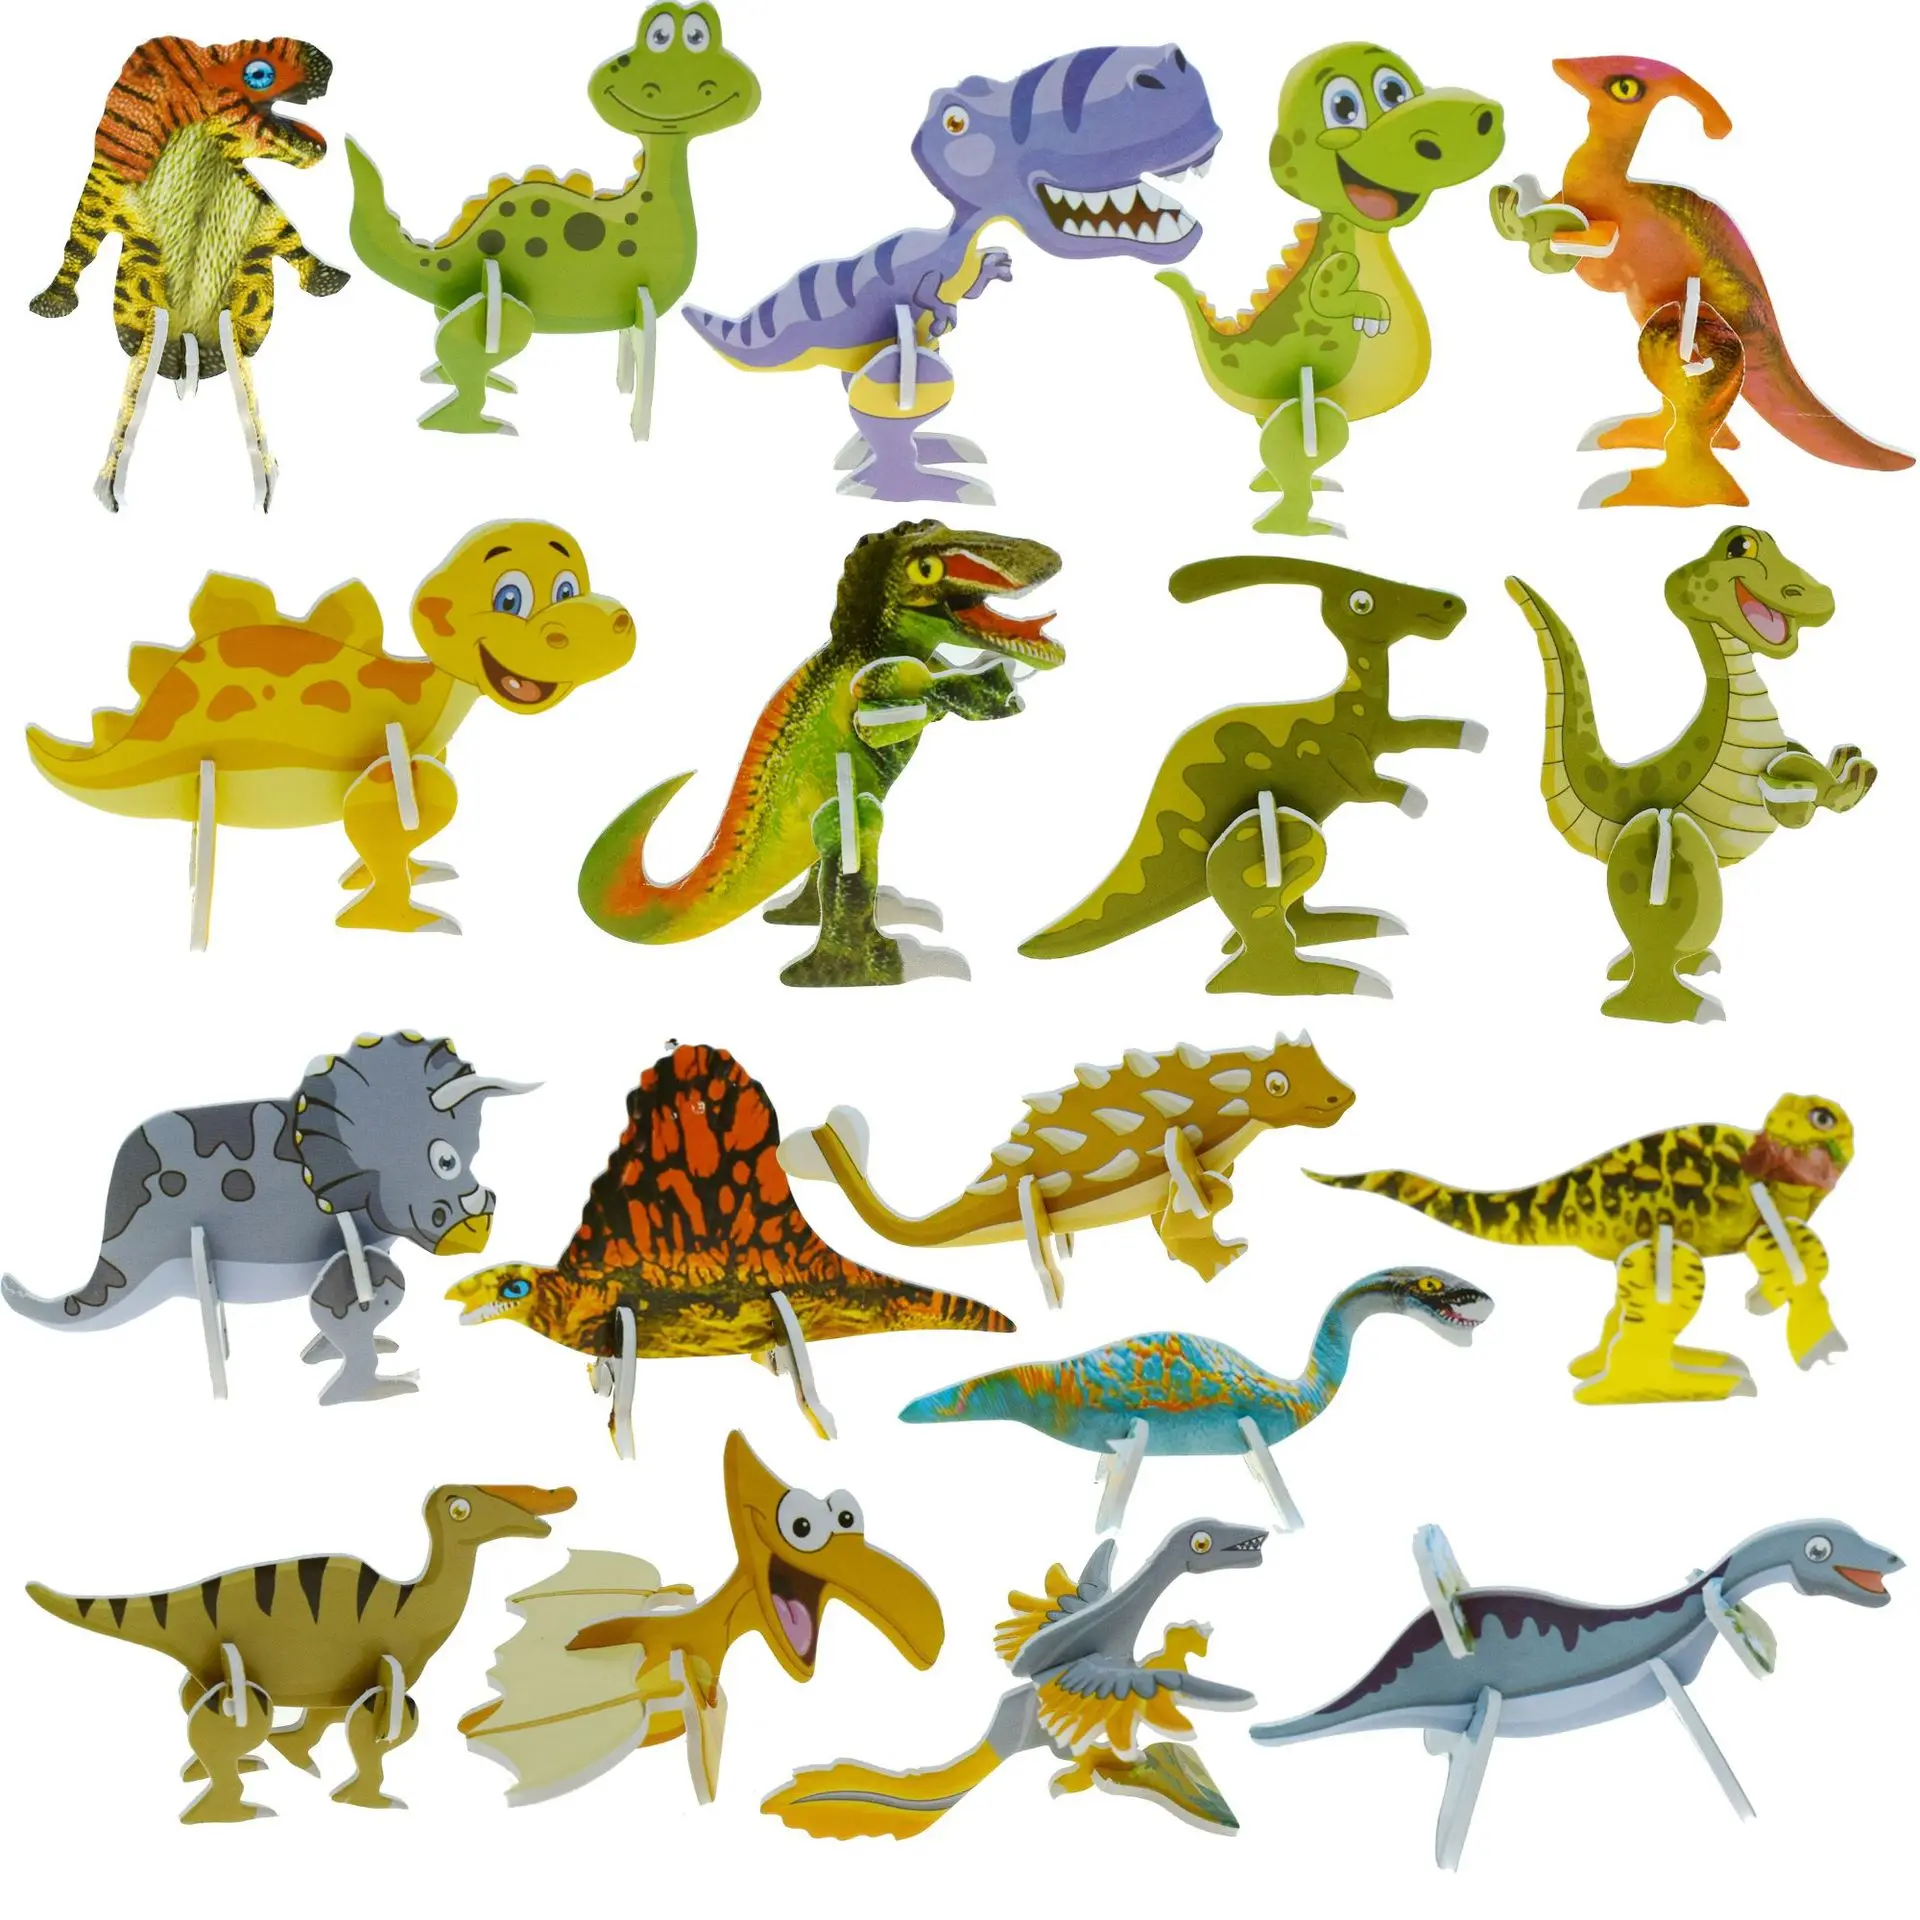 

50pc 3D Dinosaur Puzzle Most Popular Children's Party Toy Pinata Fill Carnival Award Birthday Gift For Boys And Girls